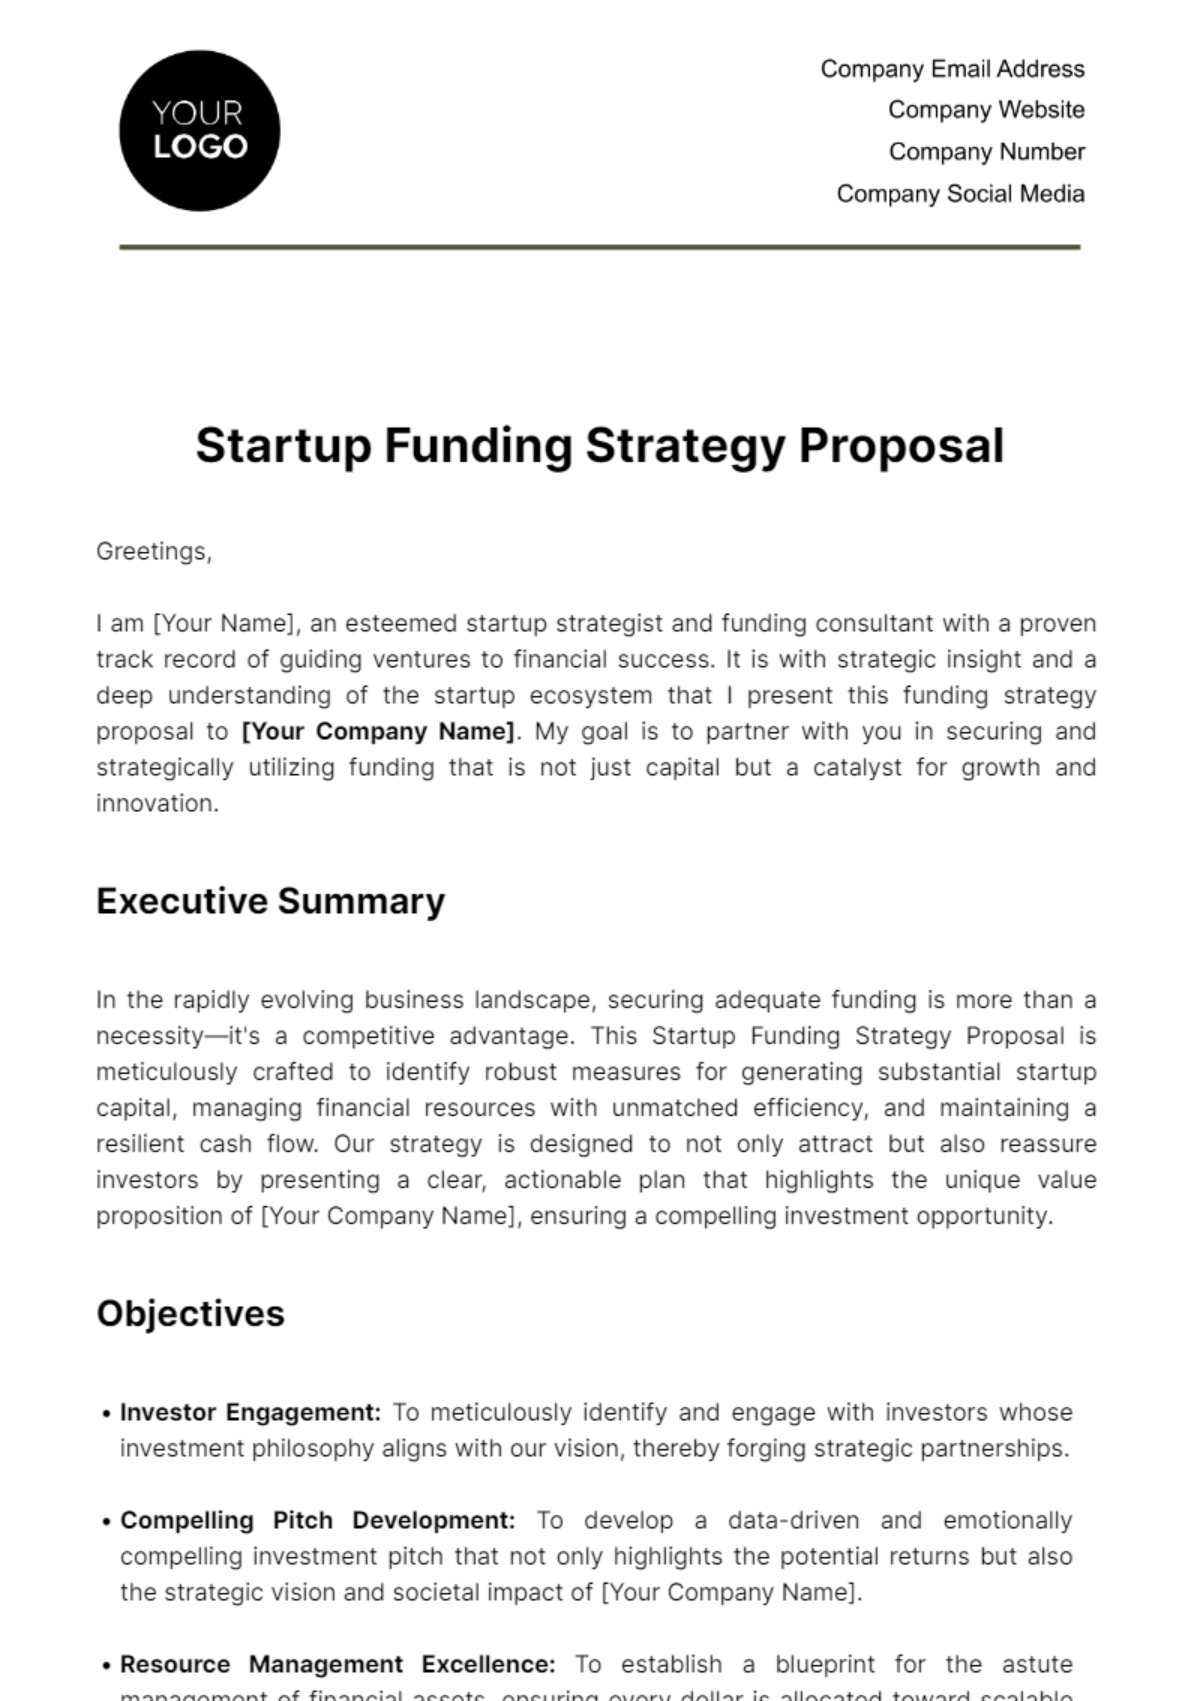 Startup Funding Strategy Proposal Template